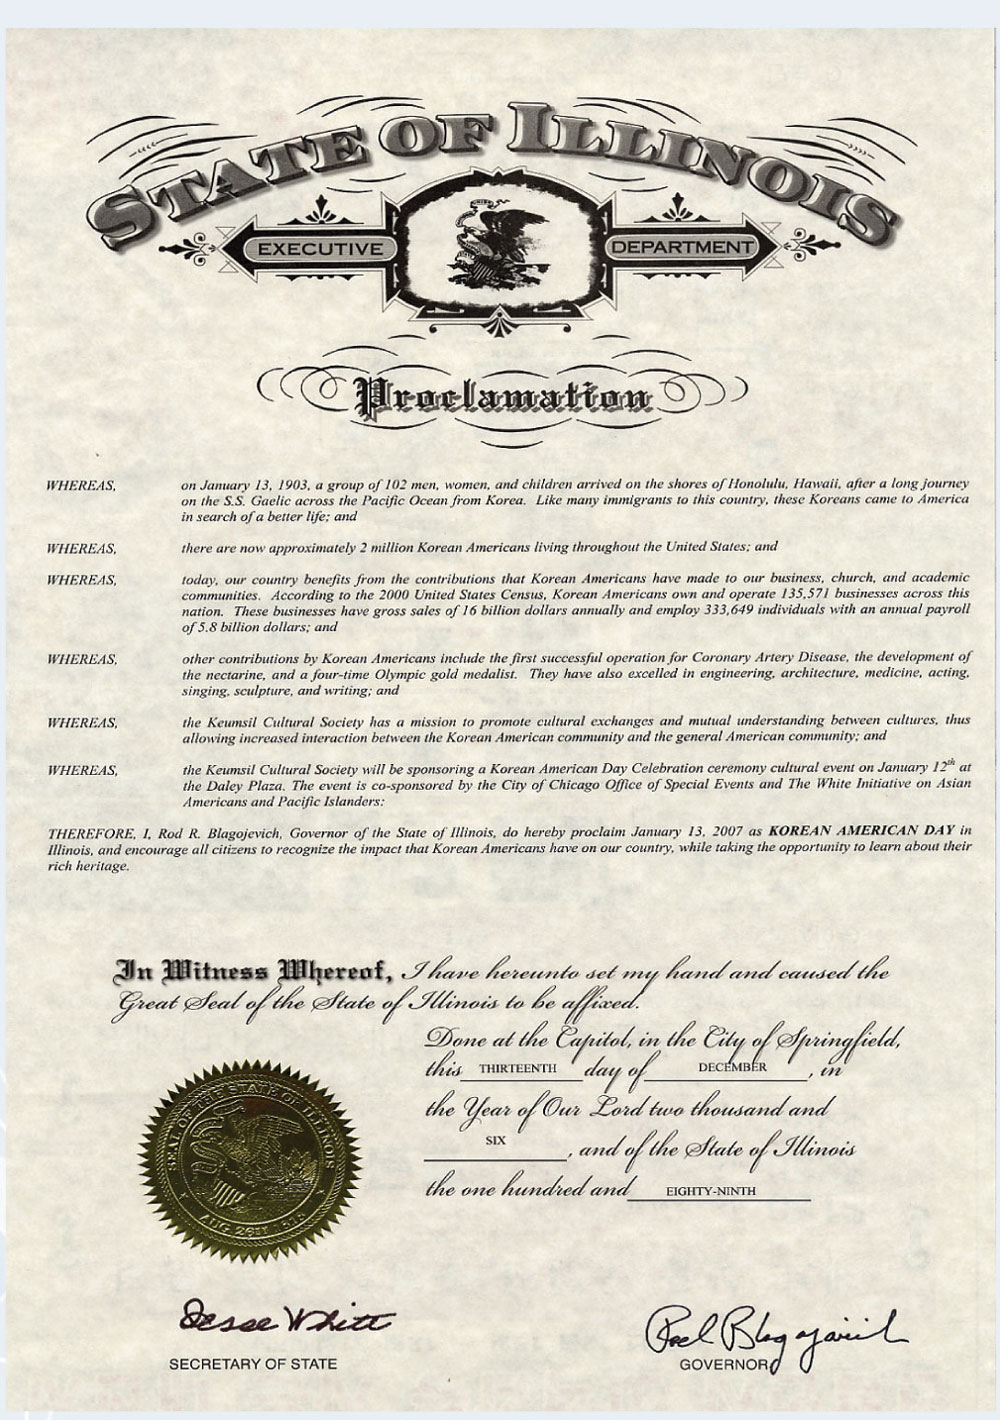 Korean American Day Proclamation - Rod R. Blagojevich, Governor of the State of Illinois